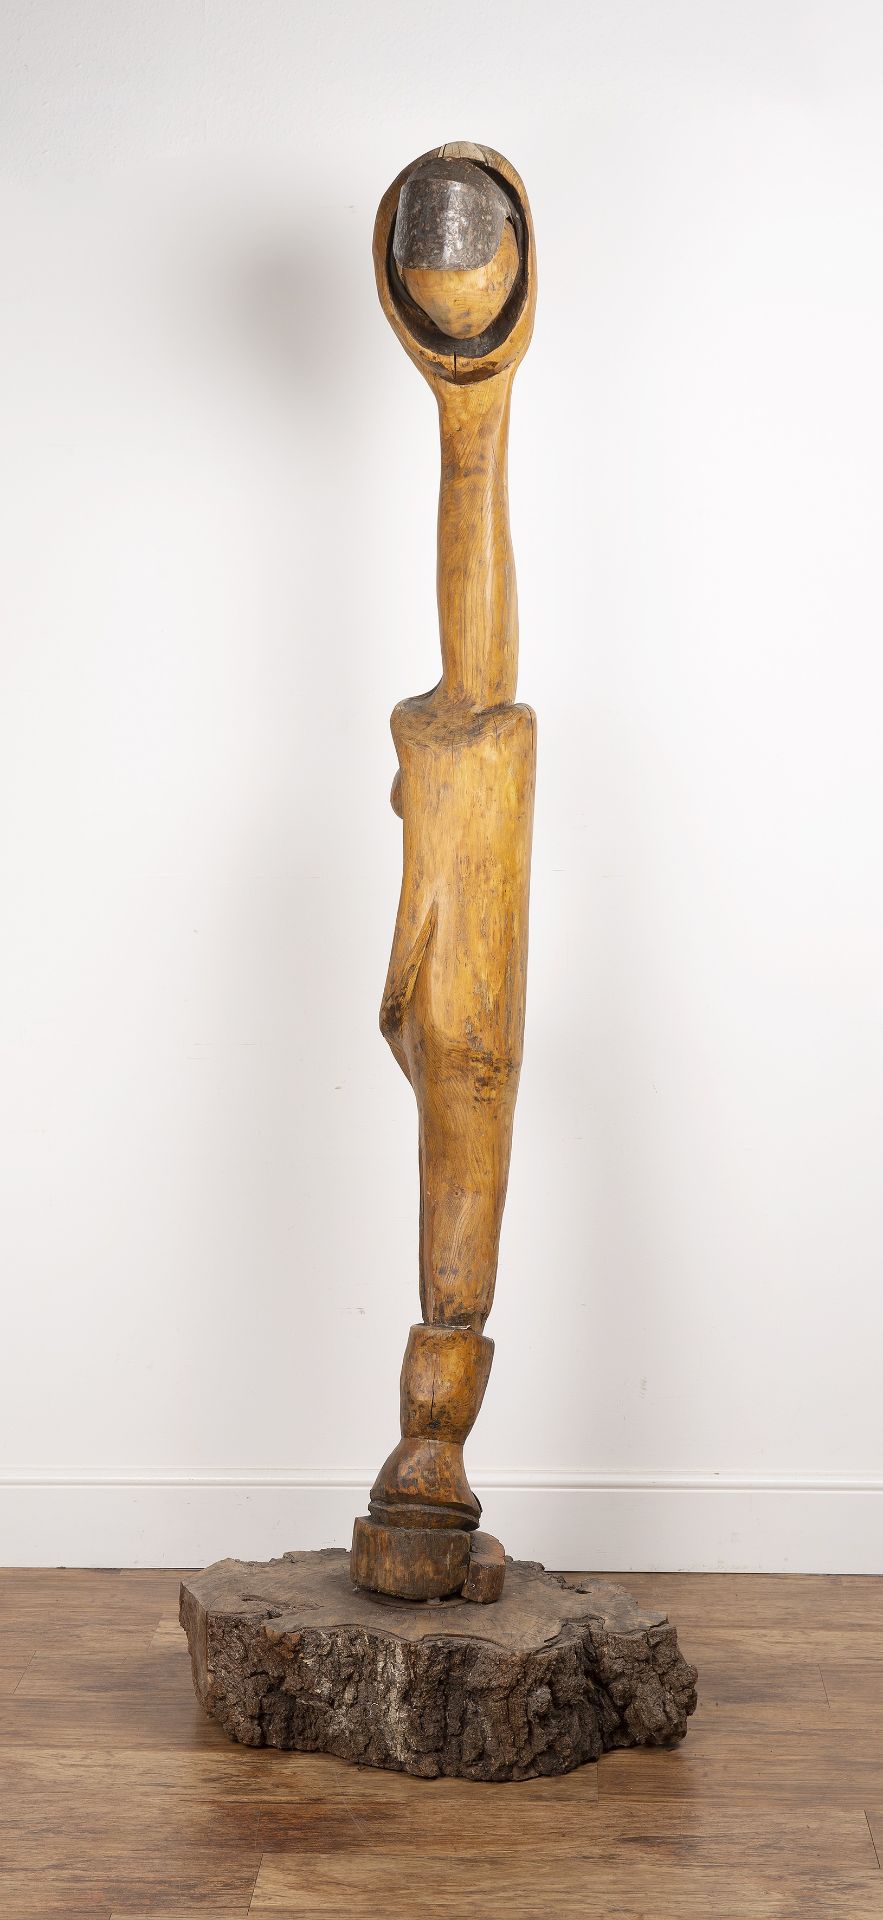 Natasha Houseago (Contemporary) 'Untitled figural sculpture', carved wood sculpture, on wooden base,